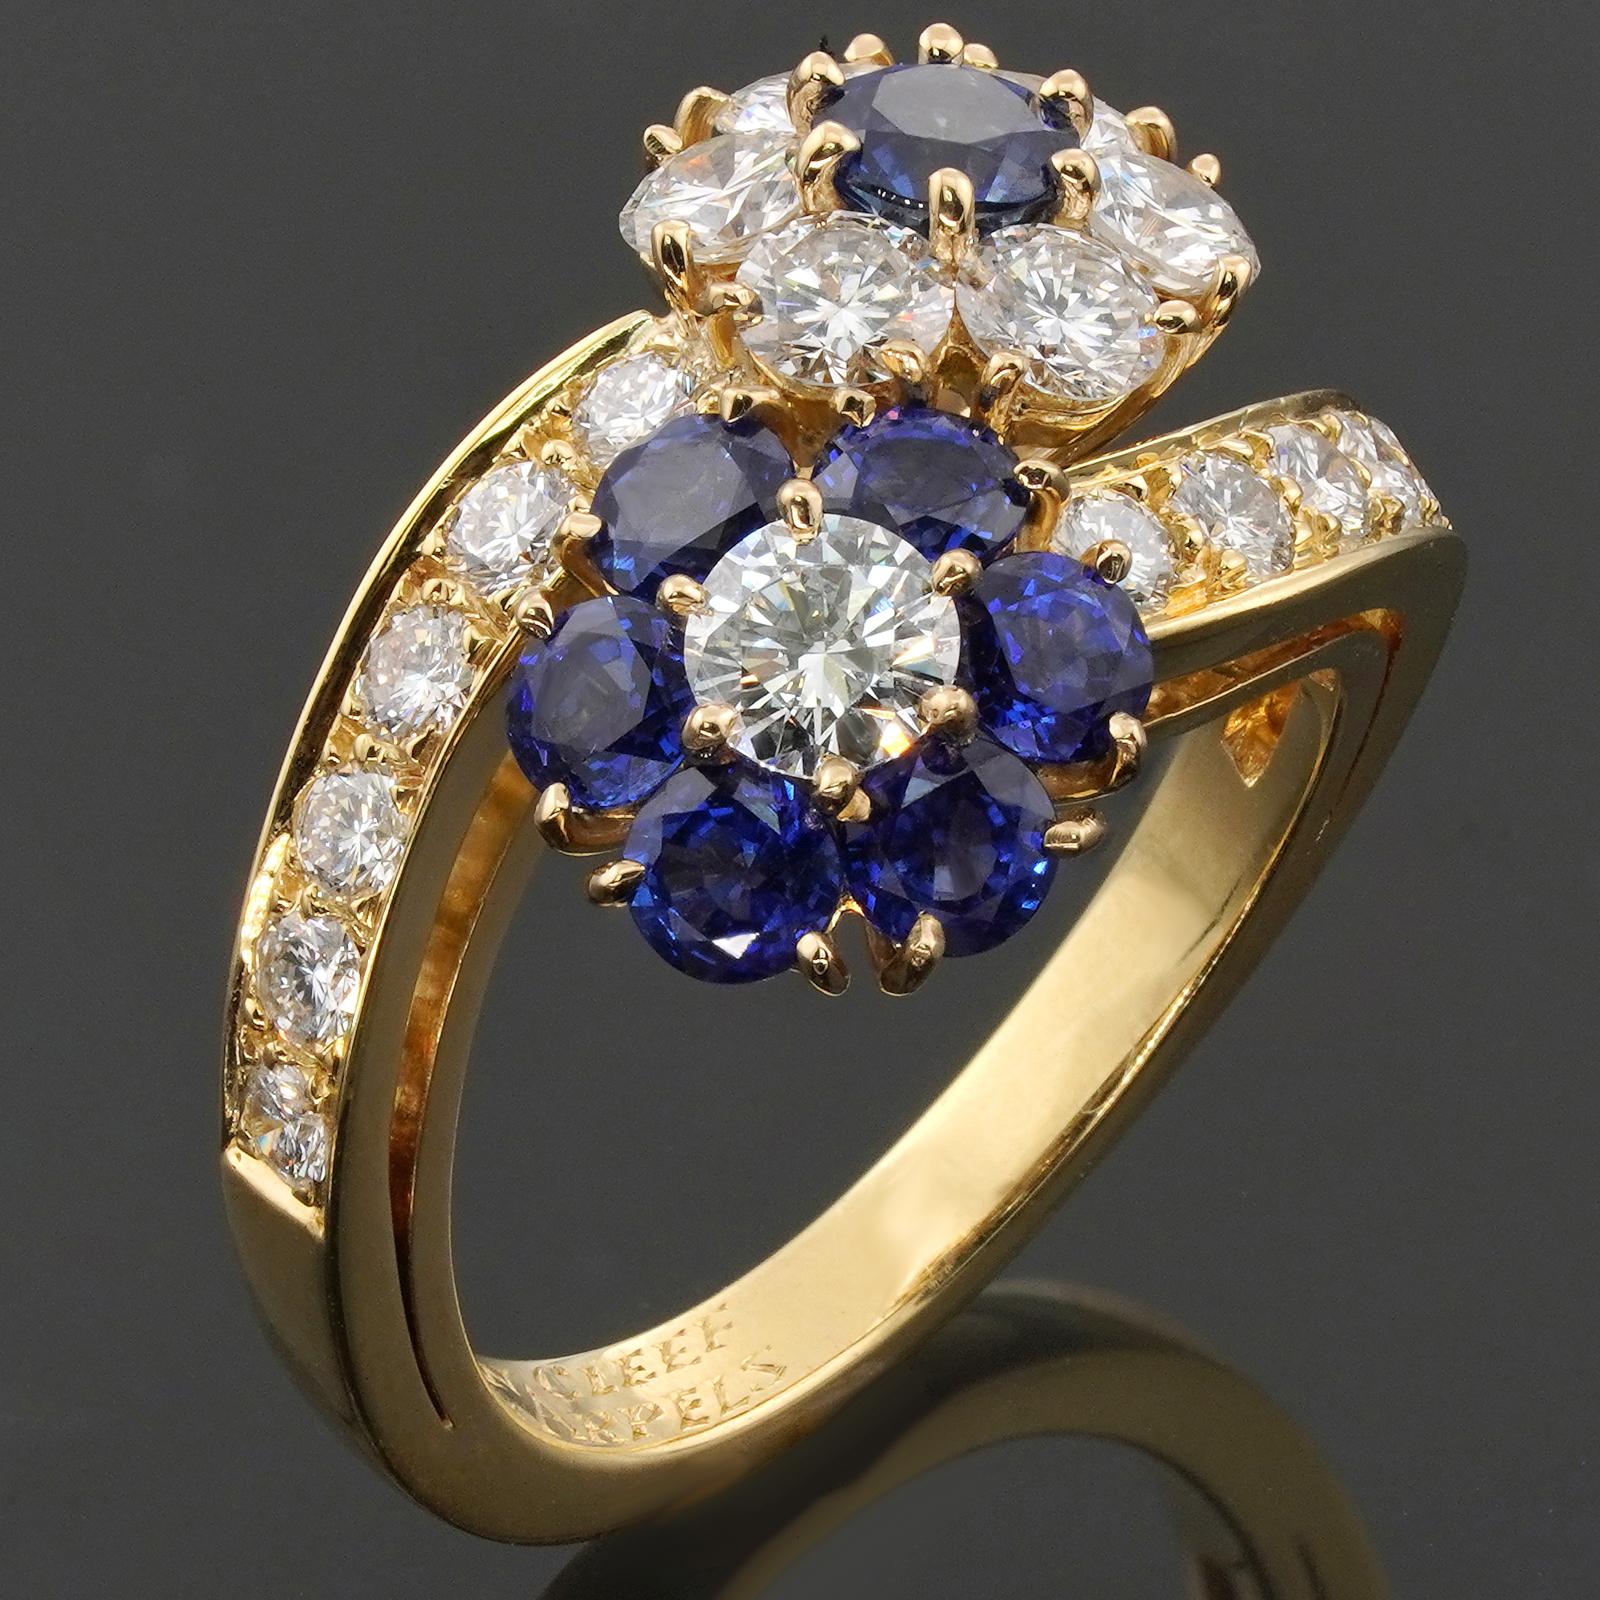 This gorgeous Van Cleef & Arpels ring from the exquisite Fleurette collection features a double flower design crafted in 18k yellow gold and set with round blue sapphires and brilliant-cut round E-F-G VVS1-VVS2 diamonds. Made in France circa 1980s. 